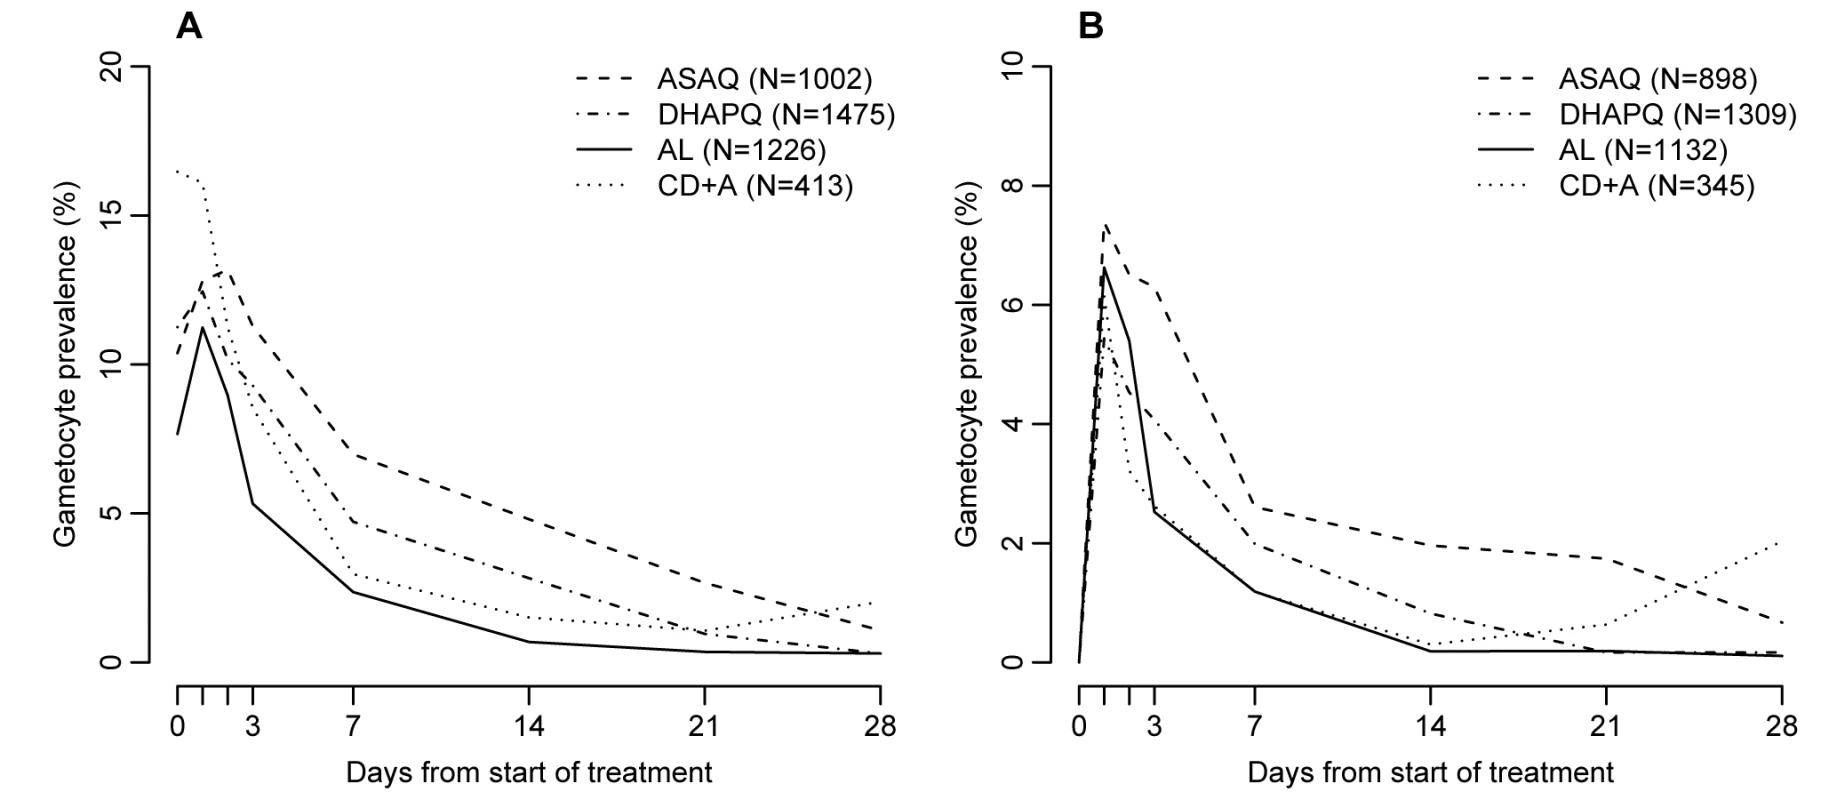 Gametocyte prevalence by treatment and day of follow-up.